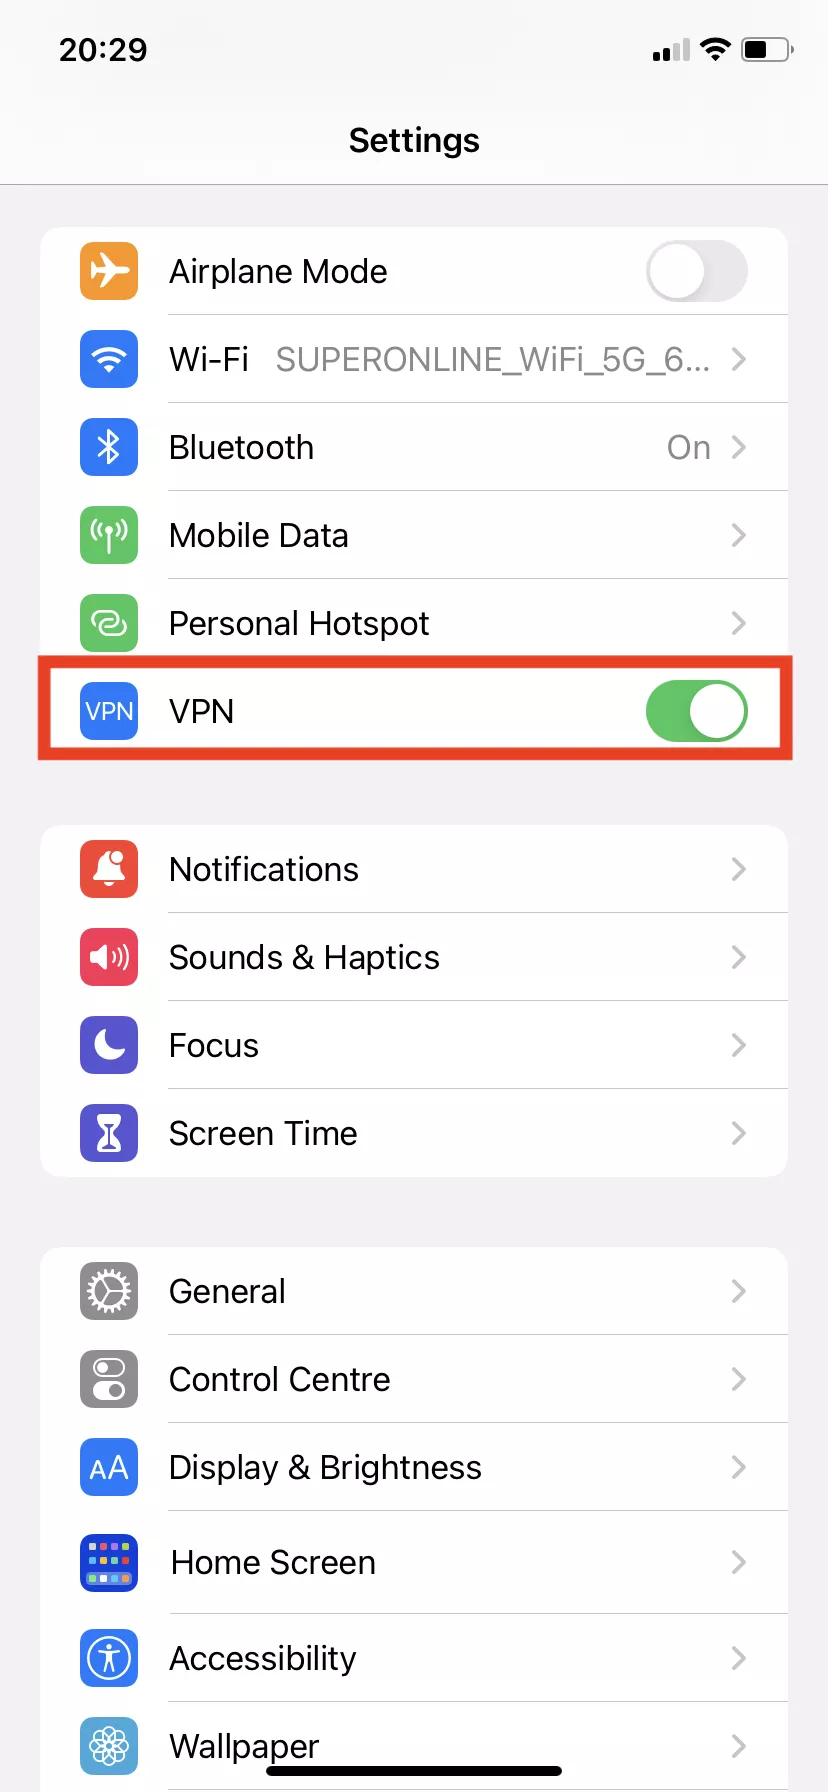 How do I setup a VPN on my iPhone for free?